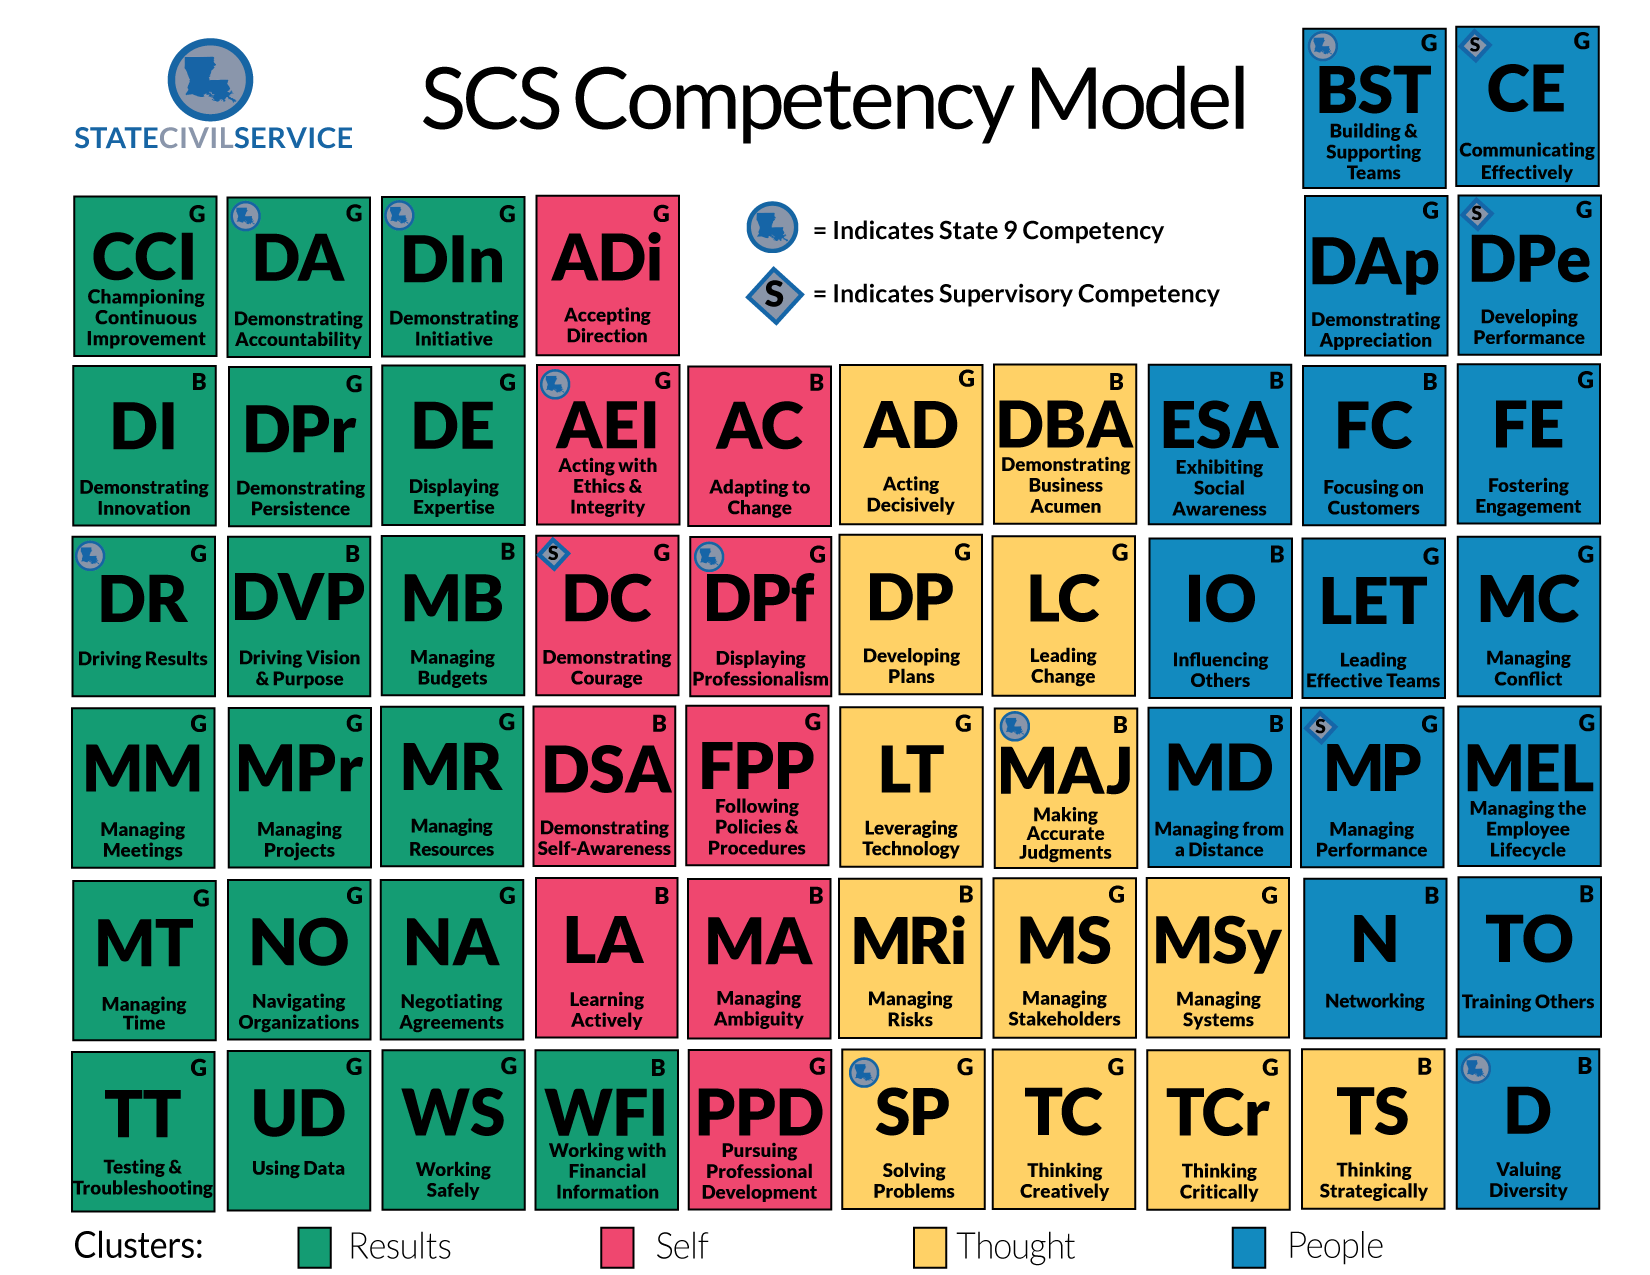 SCS Competency Model for Applicants